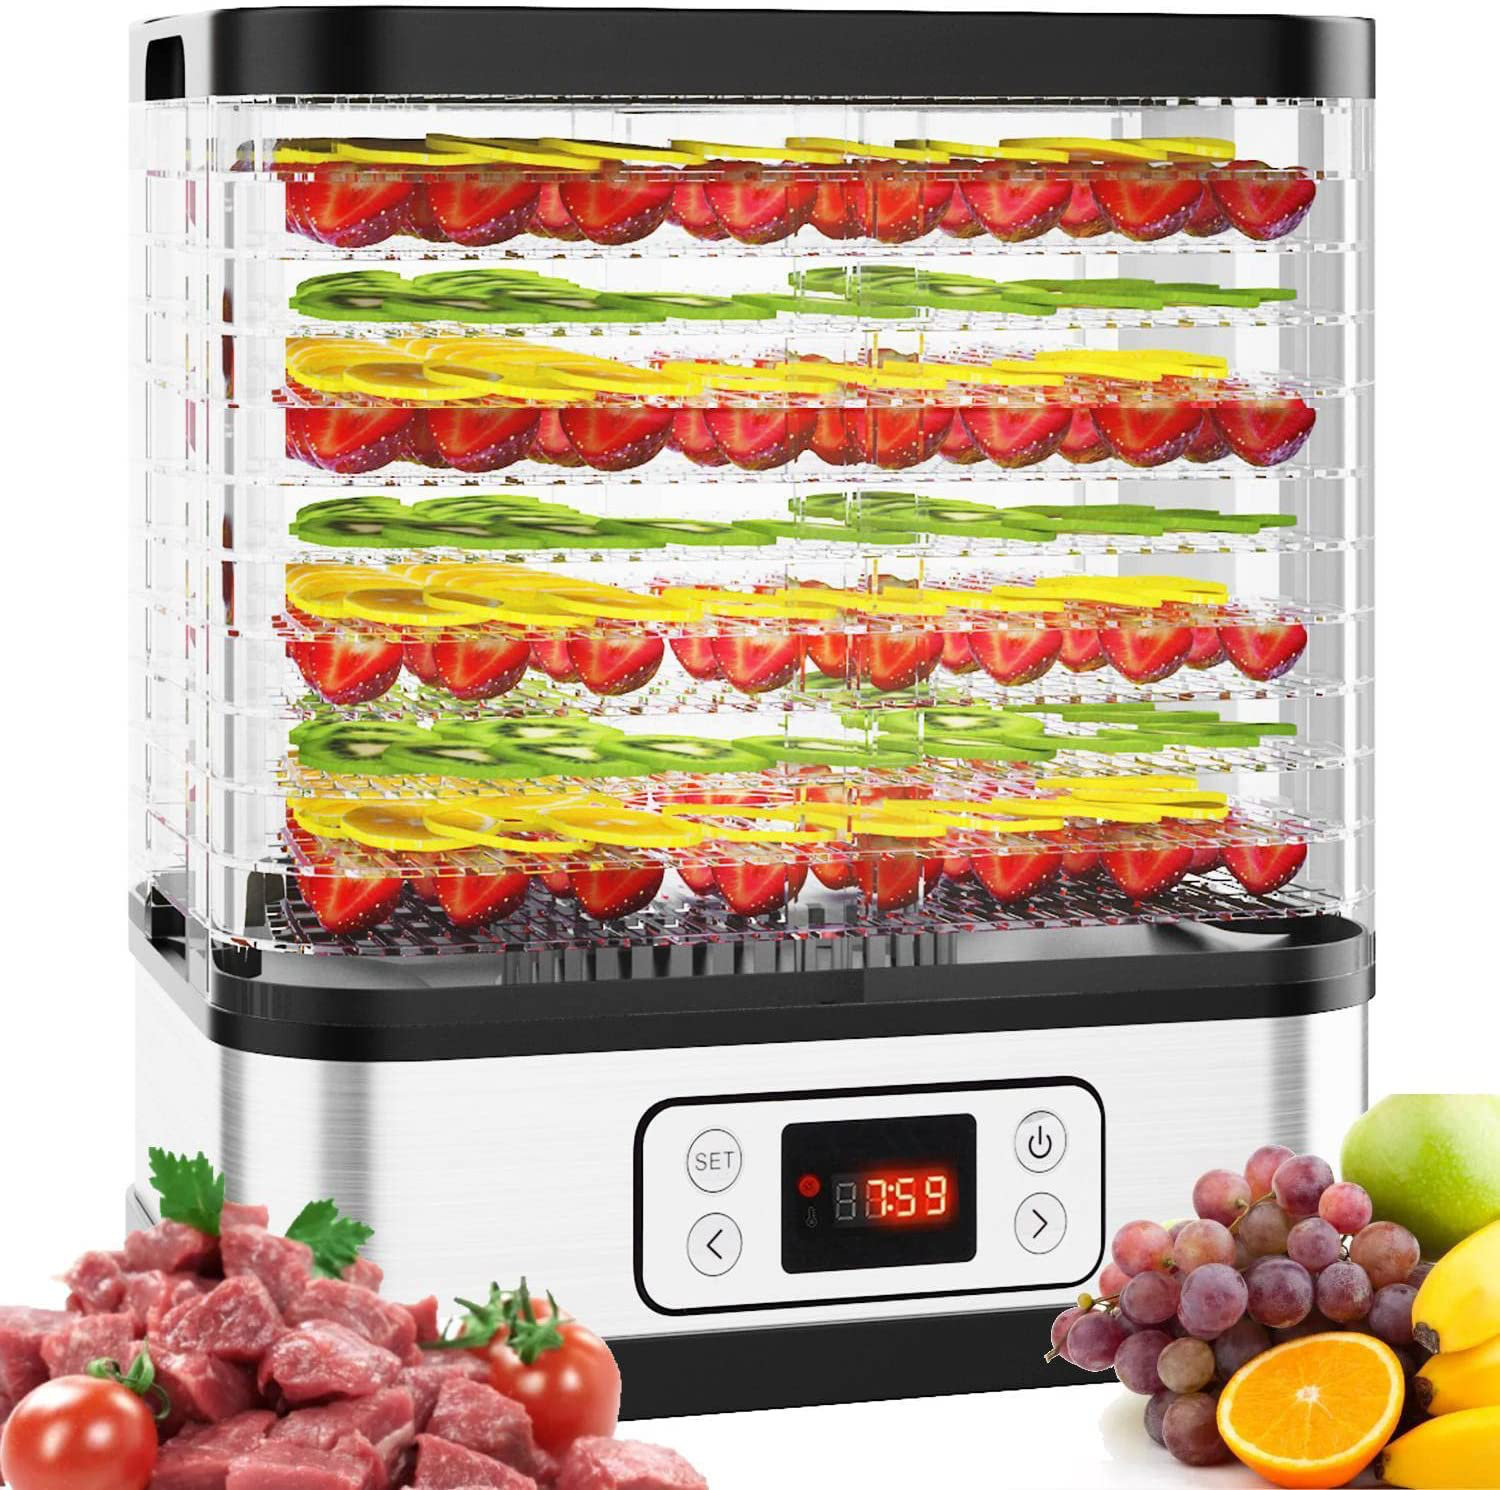 Homdox 8-Tray Food Dehydrator Machine with Fruit Roll Sheet, 72H Digital  Timer and Temperature Control, 400W Dehydrator for Food and Jerky, Meat